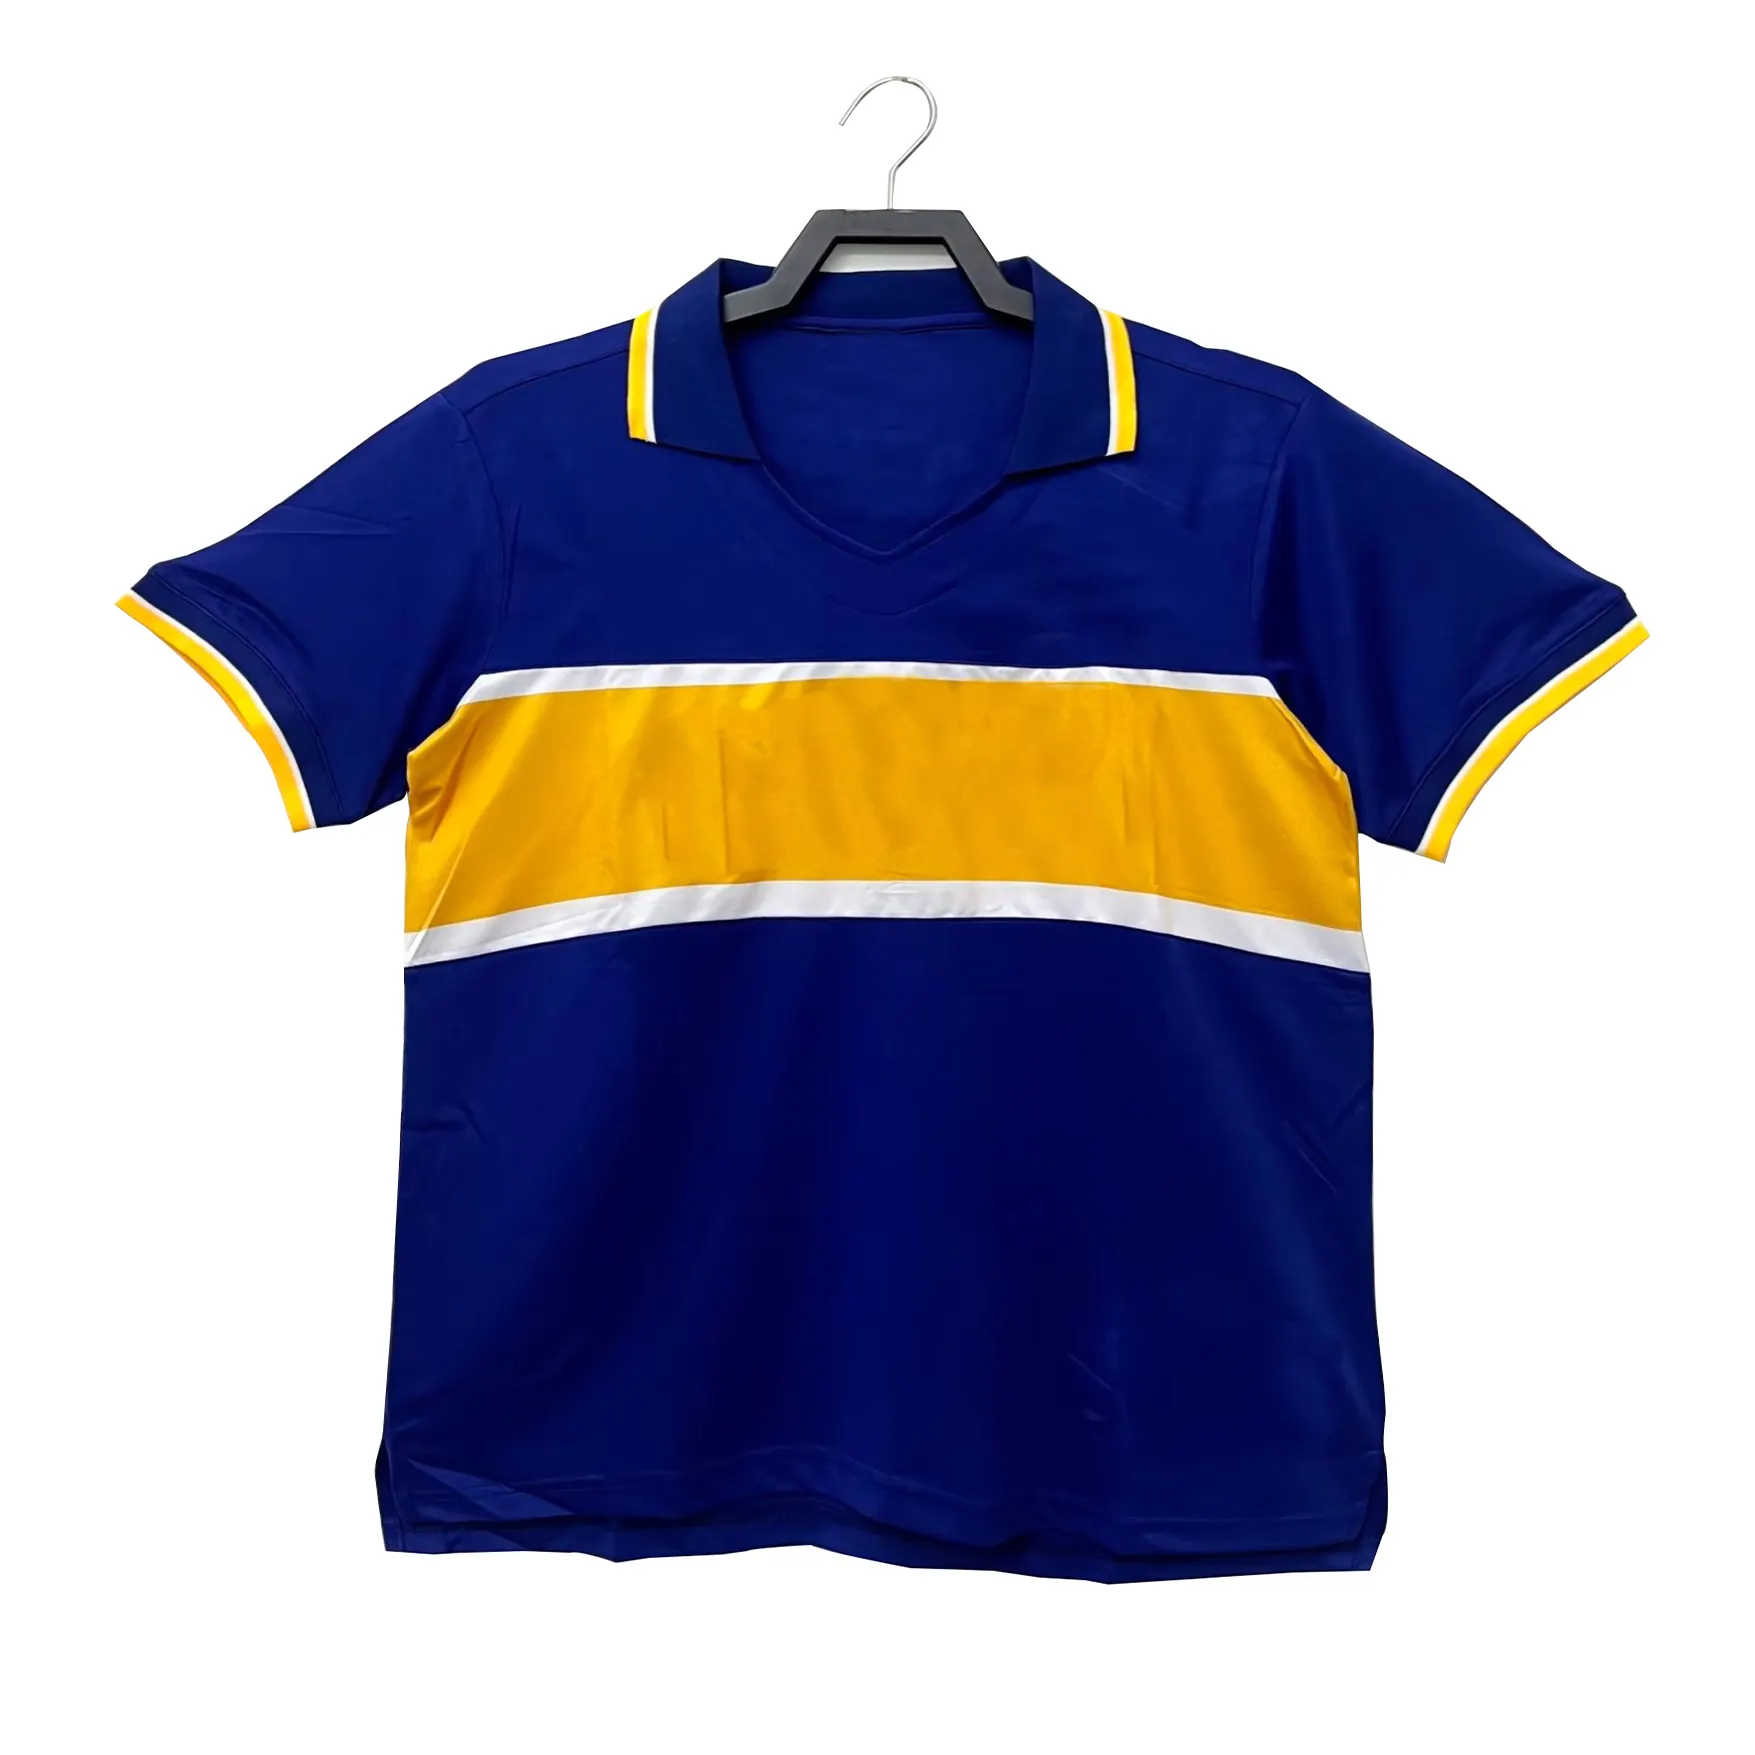 1996/97 Retro Jersey Youth Version Jersey Yellow And Blue Quick-Drying Sportswear